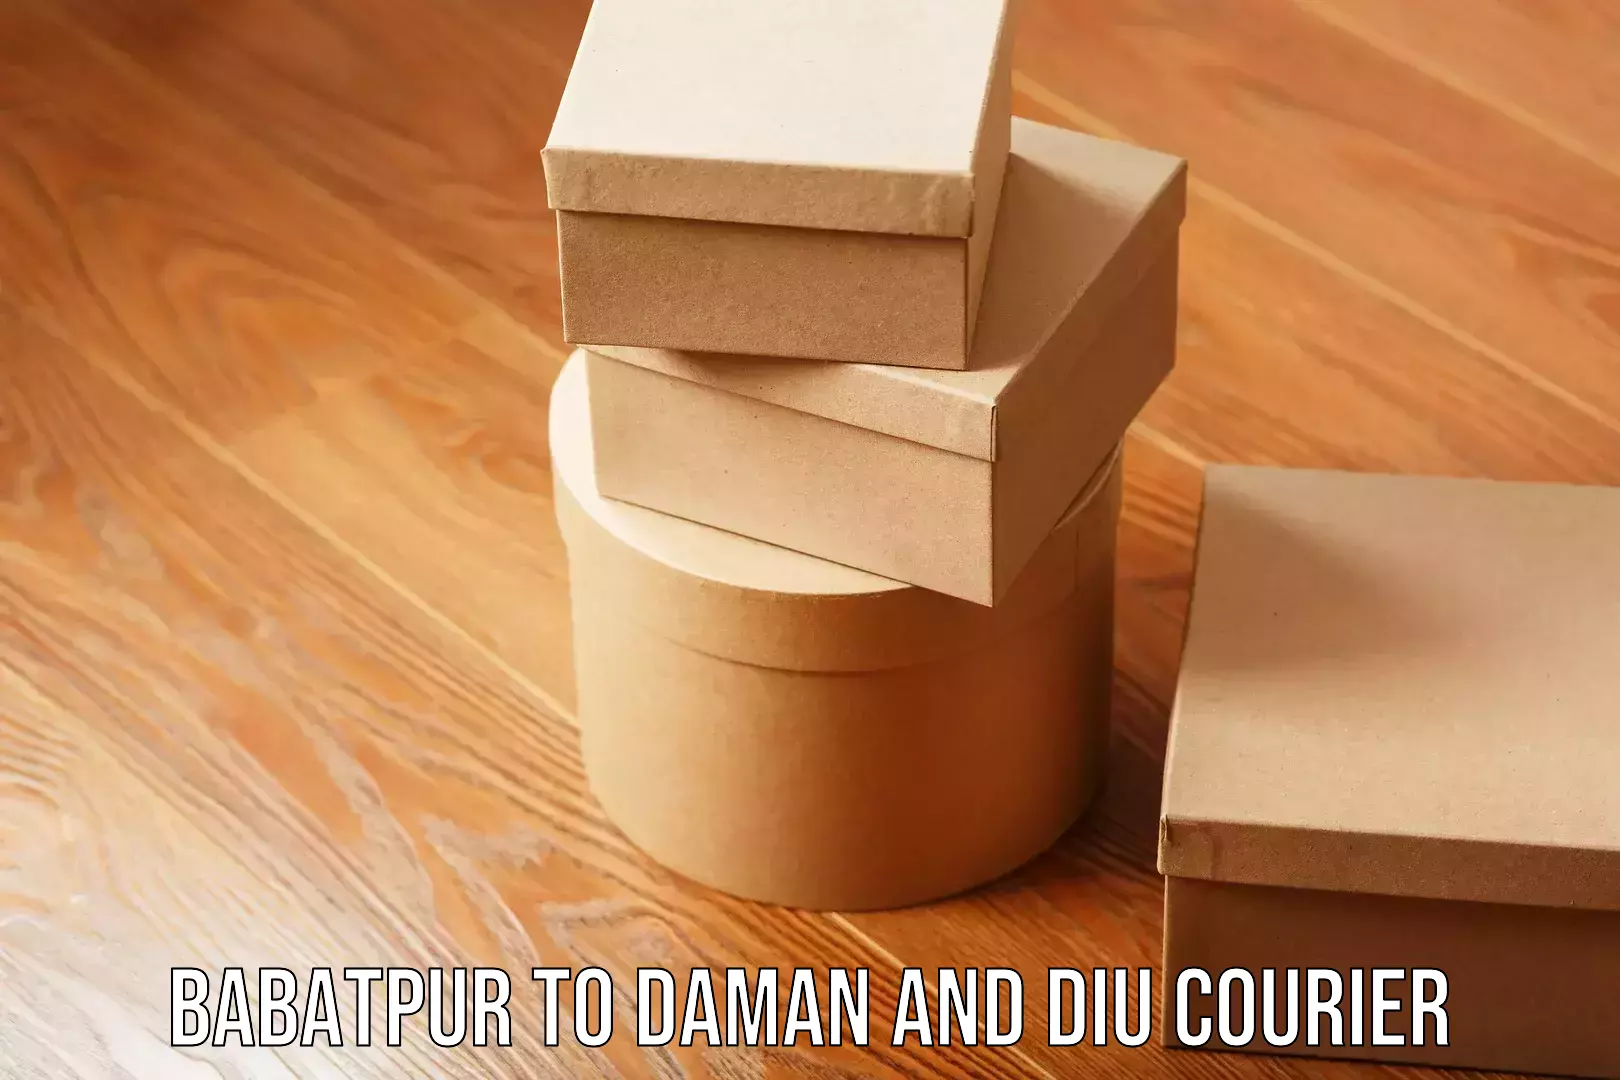 State-of-the-art courier technology Babatpur to Daman and Diu